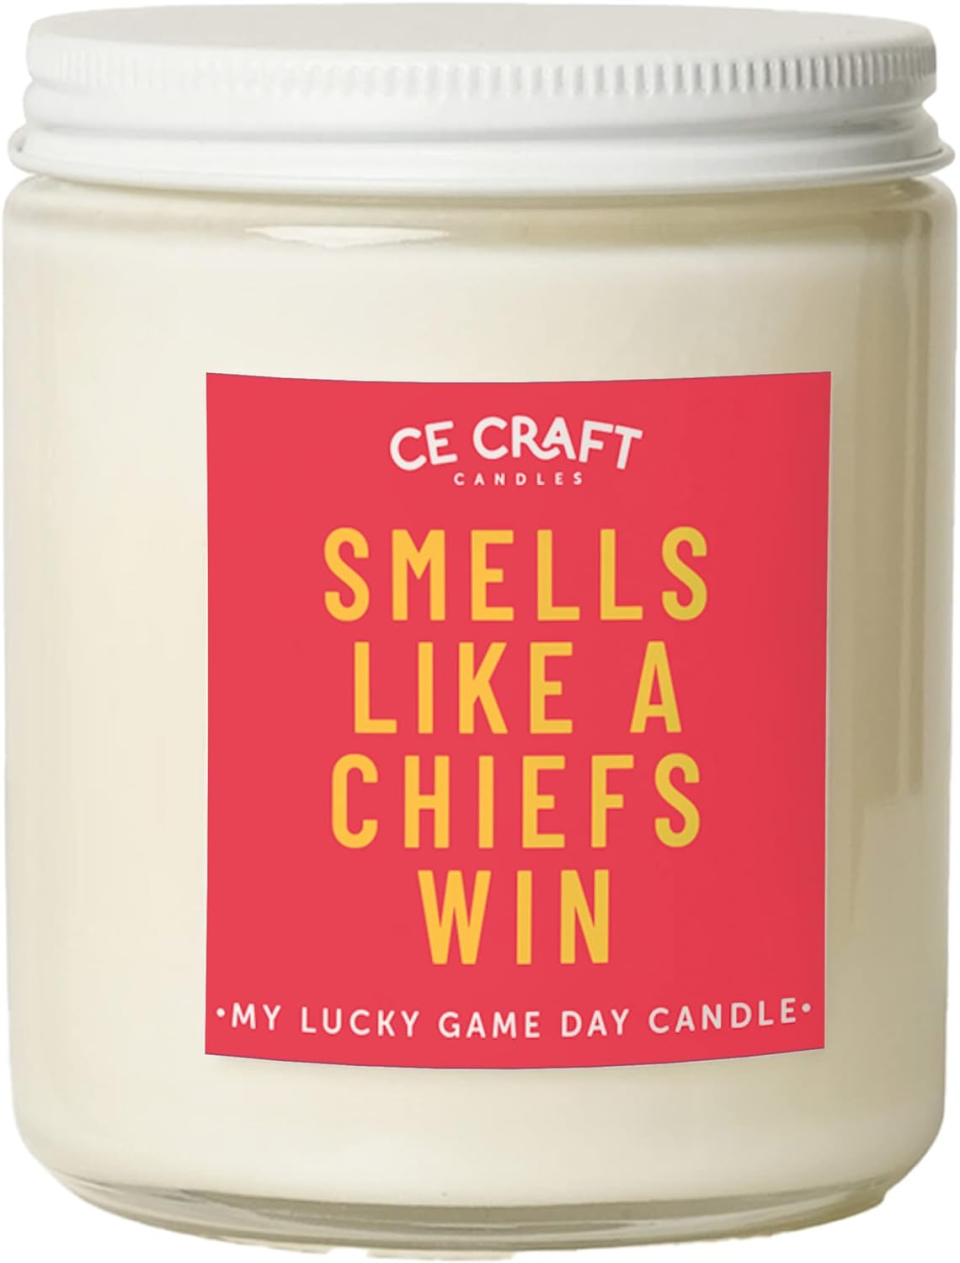 CE Craft - Smells Like A Chiefs Win Candle